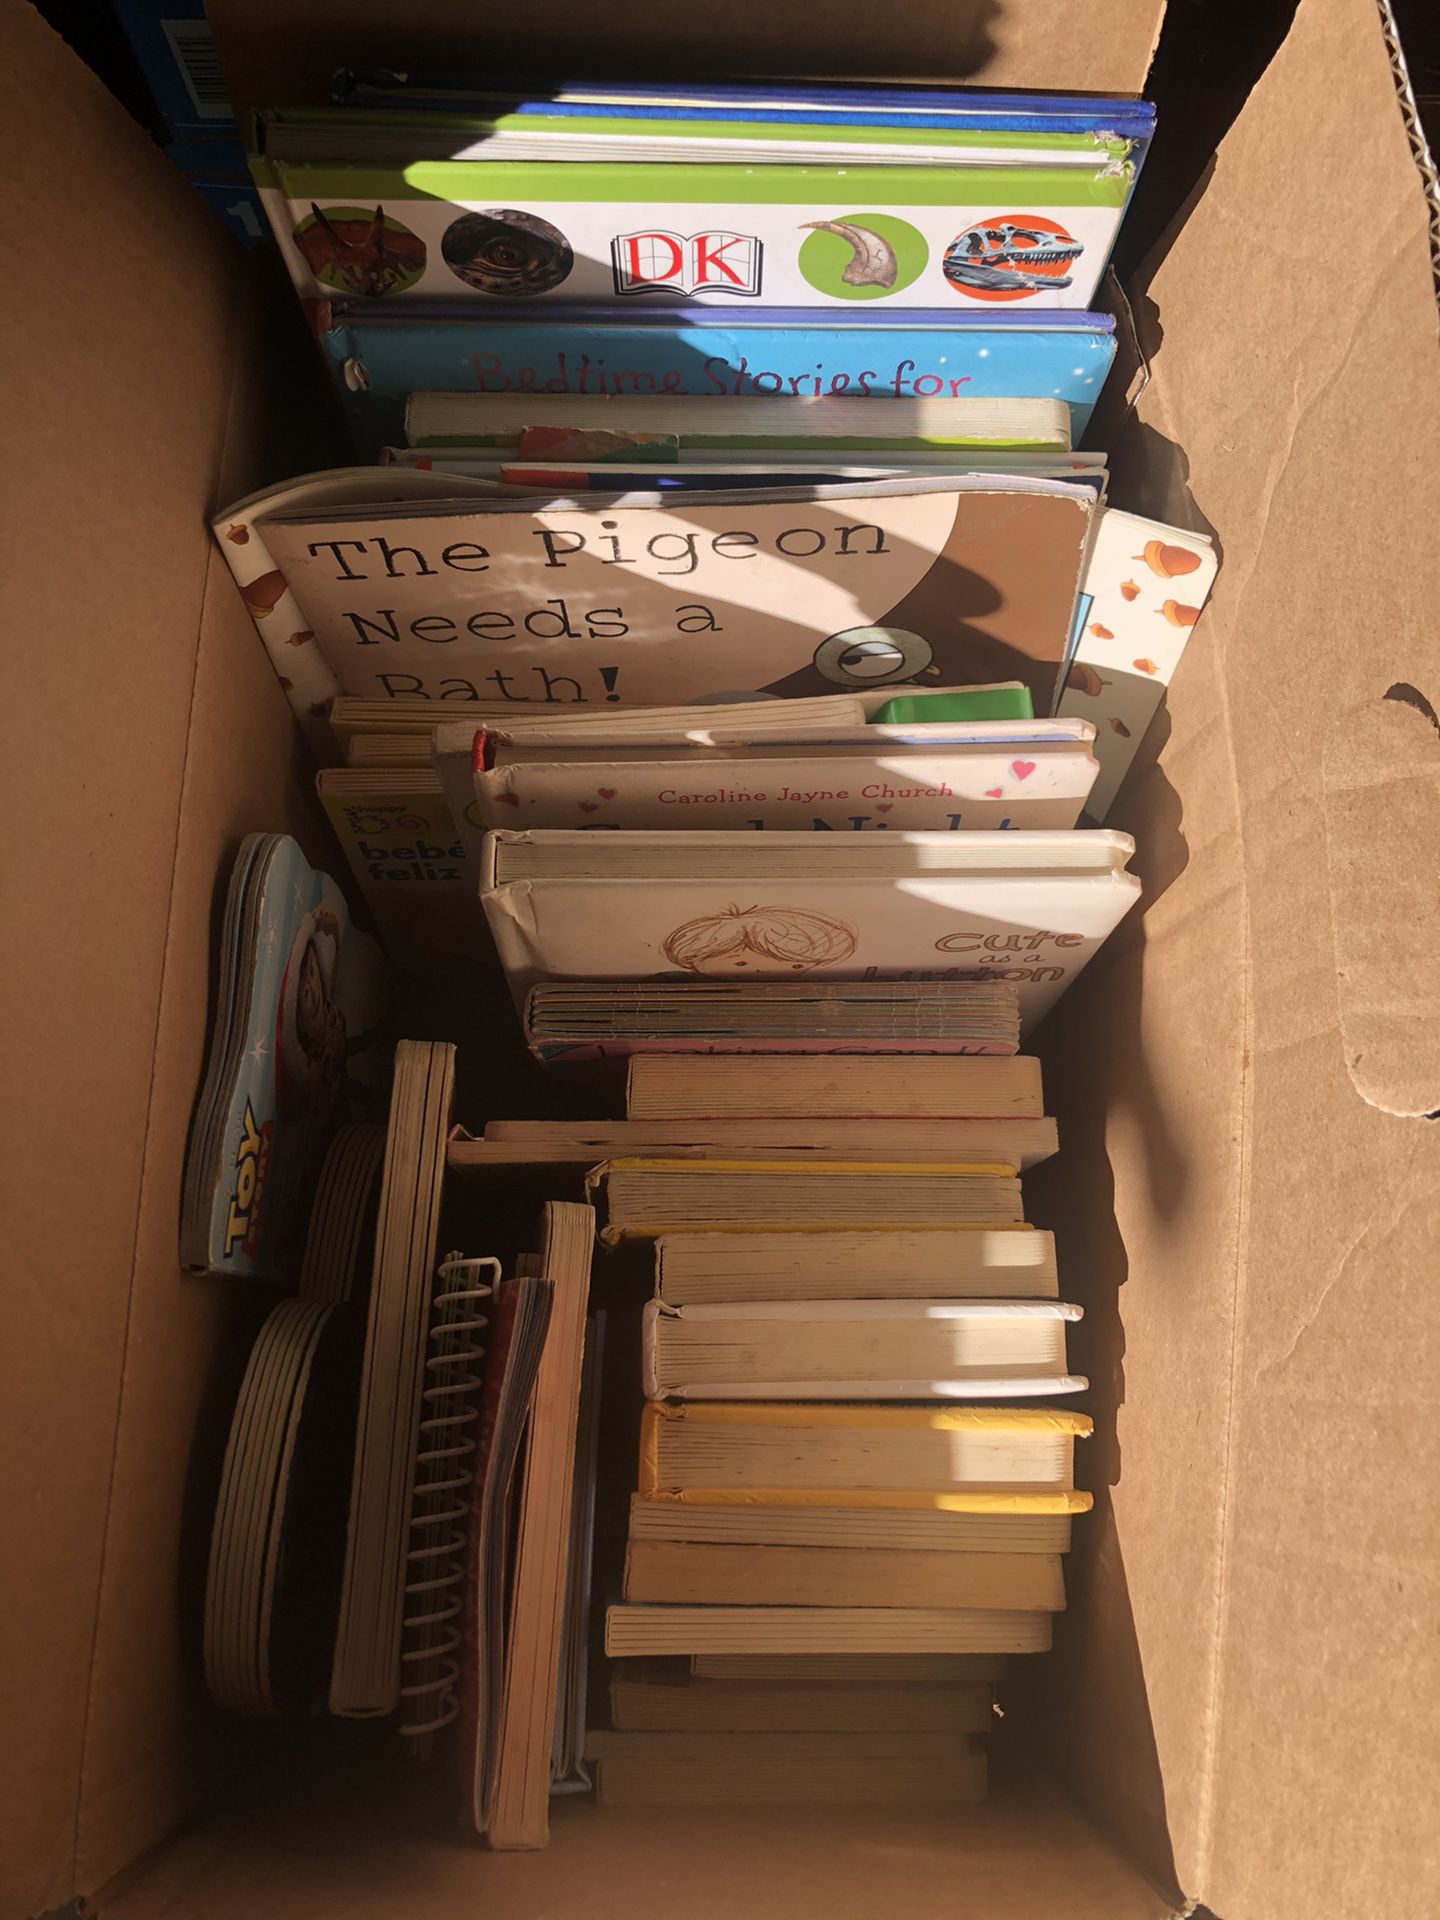 Free Baby And Toddler Books